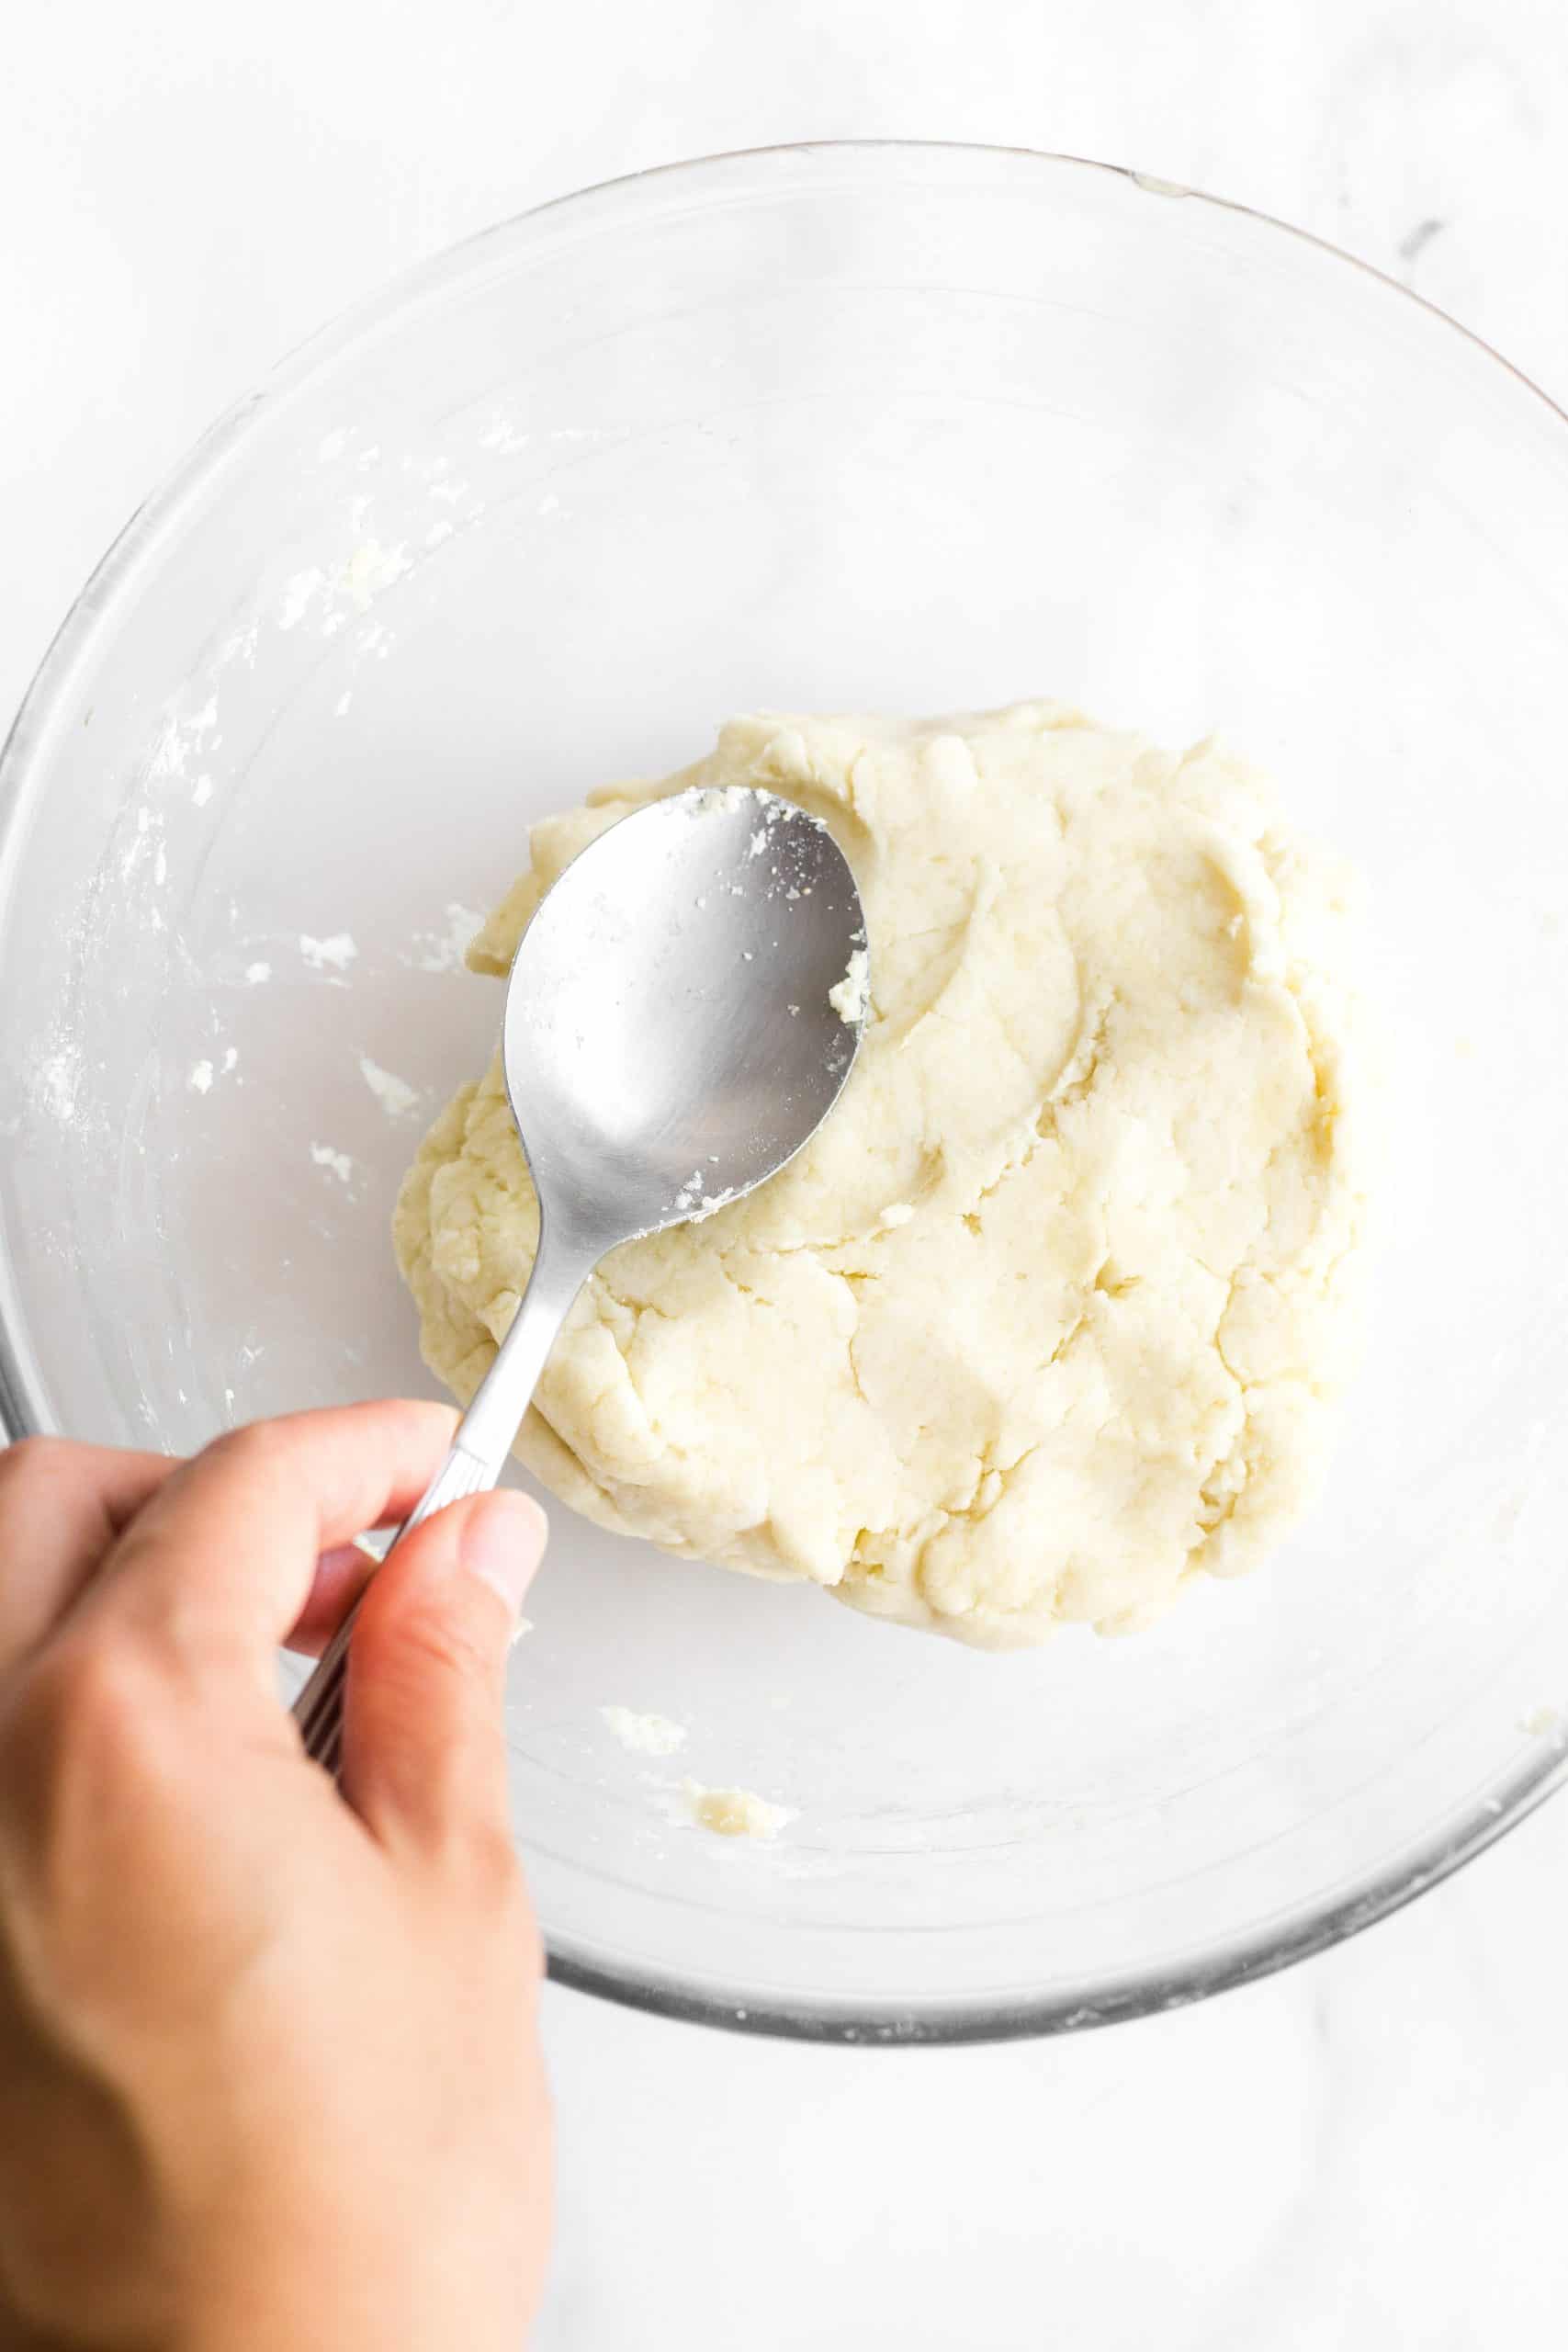 Mixing dairy-free breadsticks dough in a glass bowl with metal spoon.